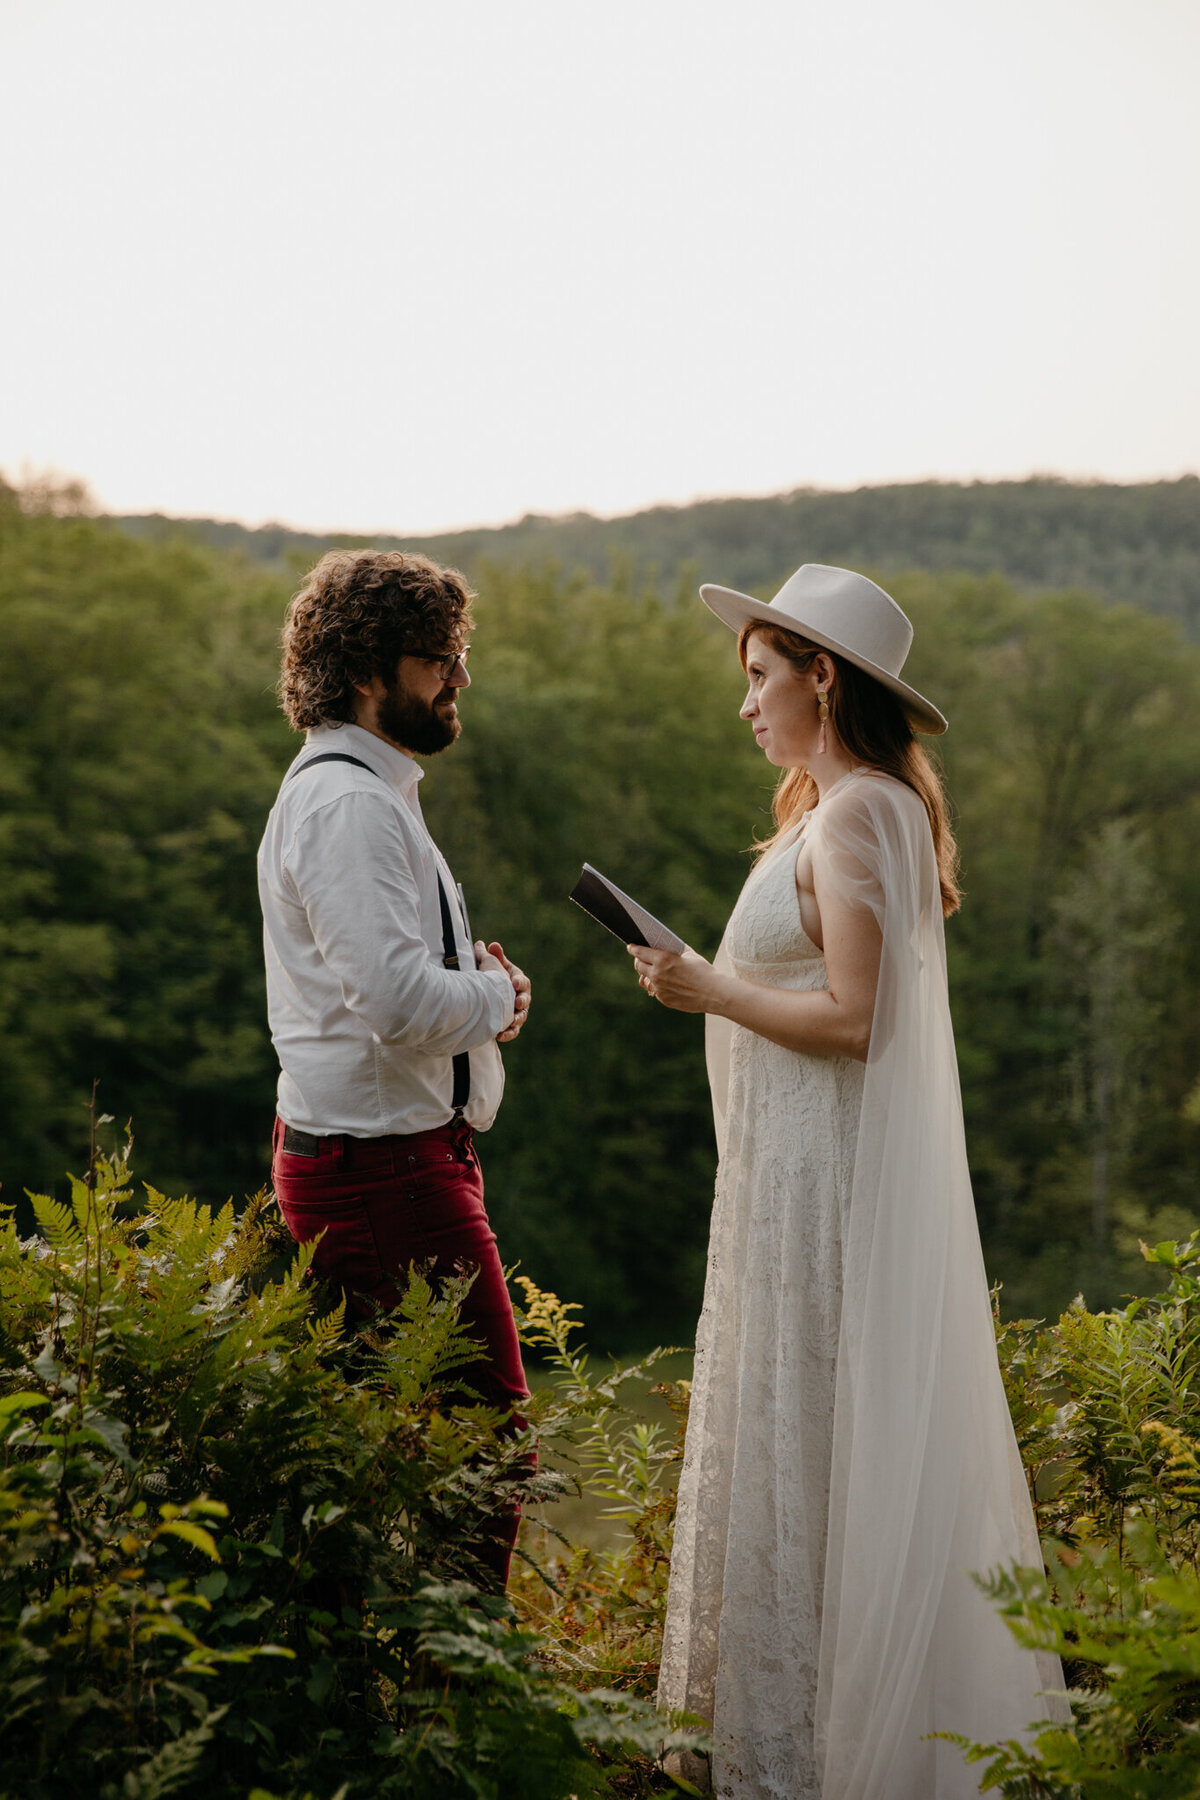 Manistee-Forest-Michigan-Elopement-082021-SparrowSongCollective-Blog-599